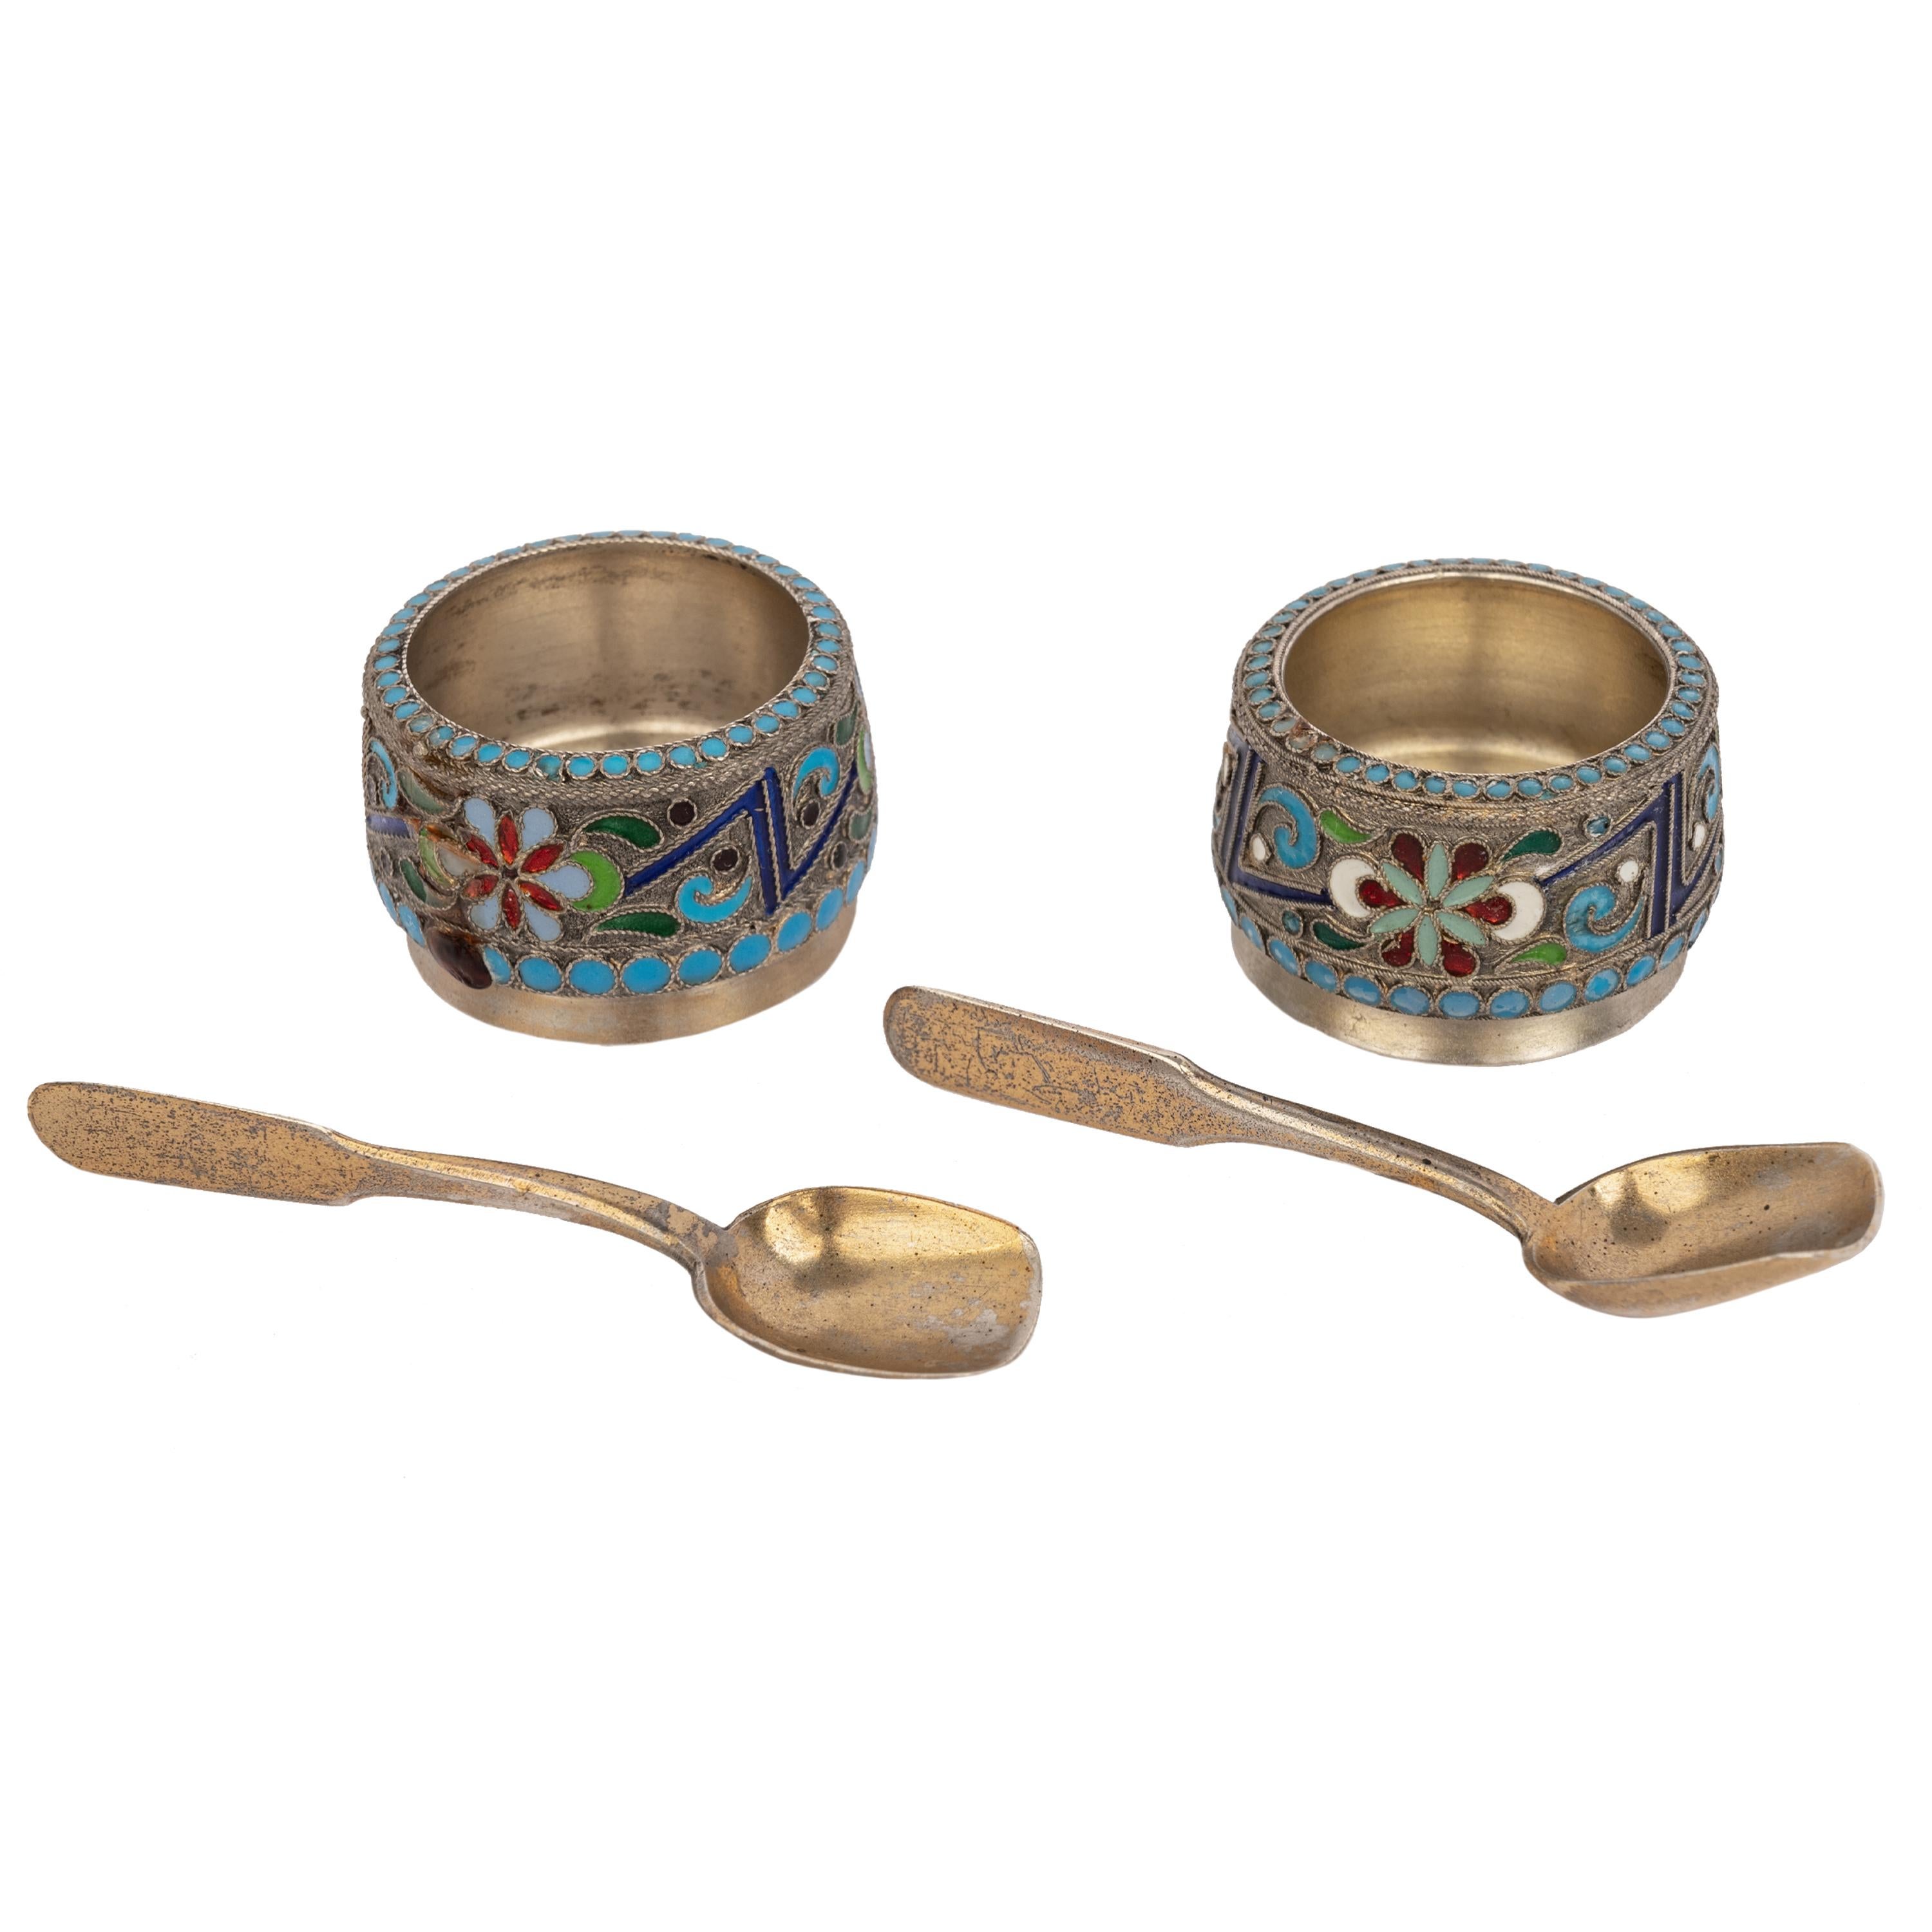 Antique Pair of Russian Silver Gilt Enamel Cloisonné Salts Spoons St. Petersburg In Good Condition For Sale In Portland, OR